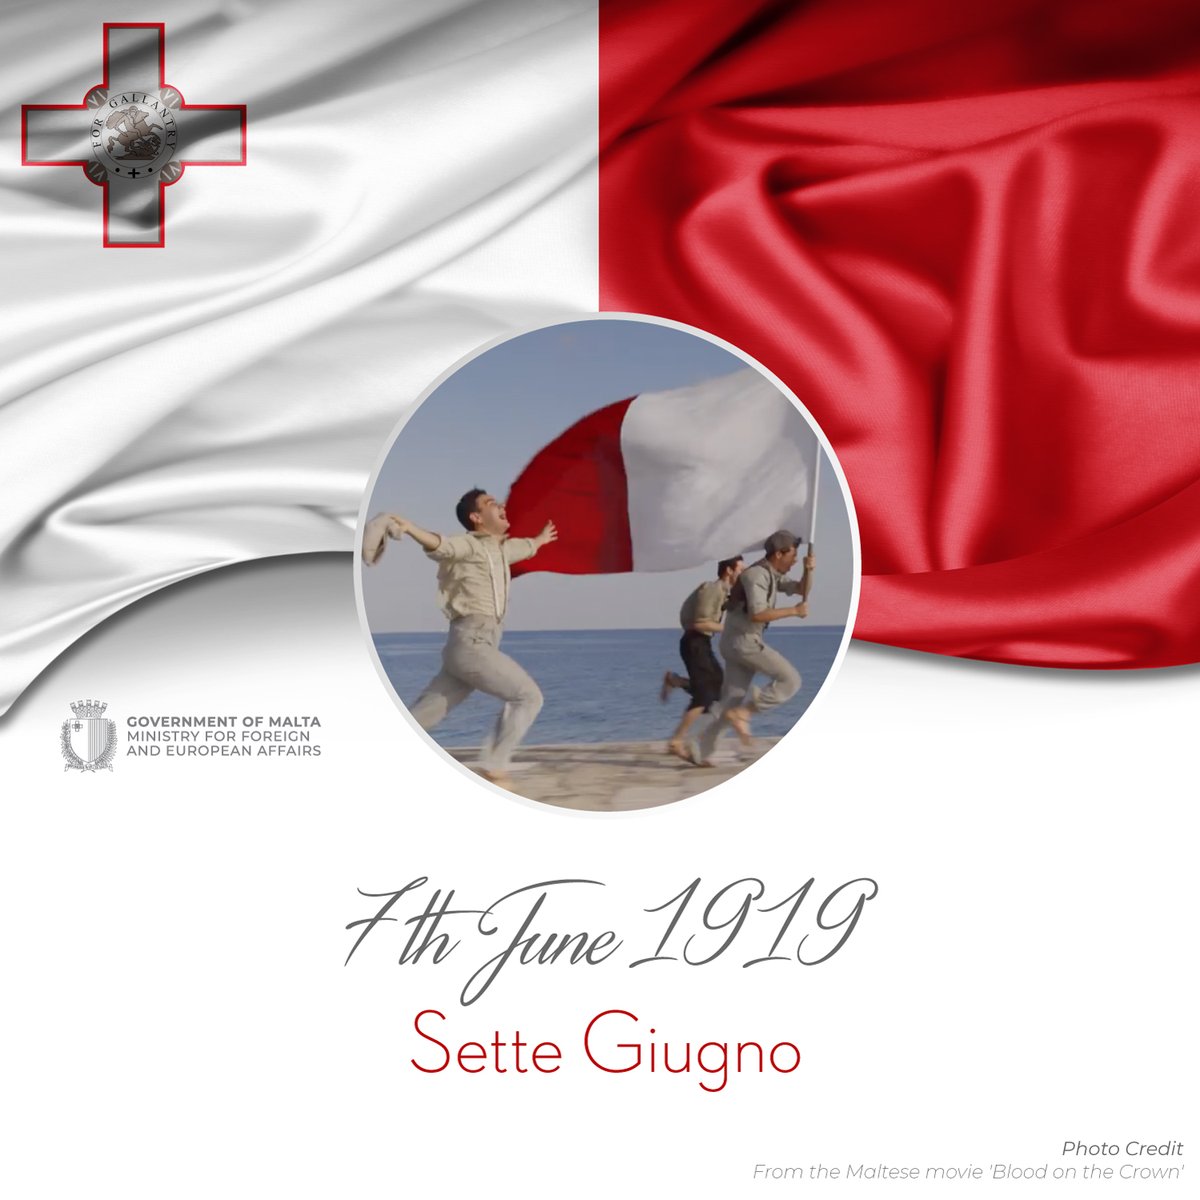 #Malta 🇲🇹 commemorates the 102nd anniversary of #SetteGiugno.

In remembrance to the lives lost during the riots of 7th June 1919, when the Maltese people revolted against the British, demanding a representative government for the island.